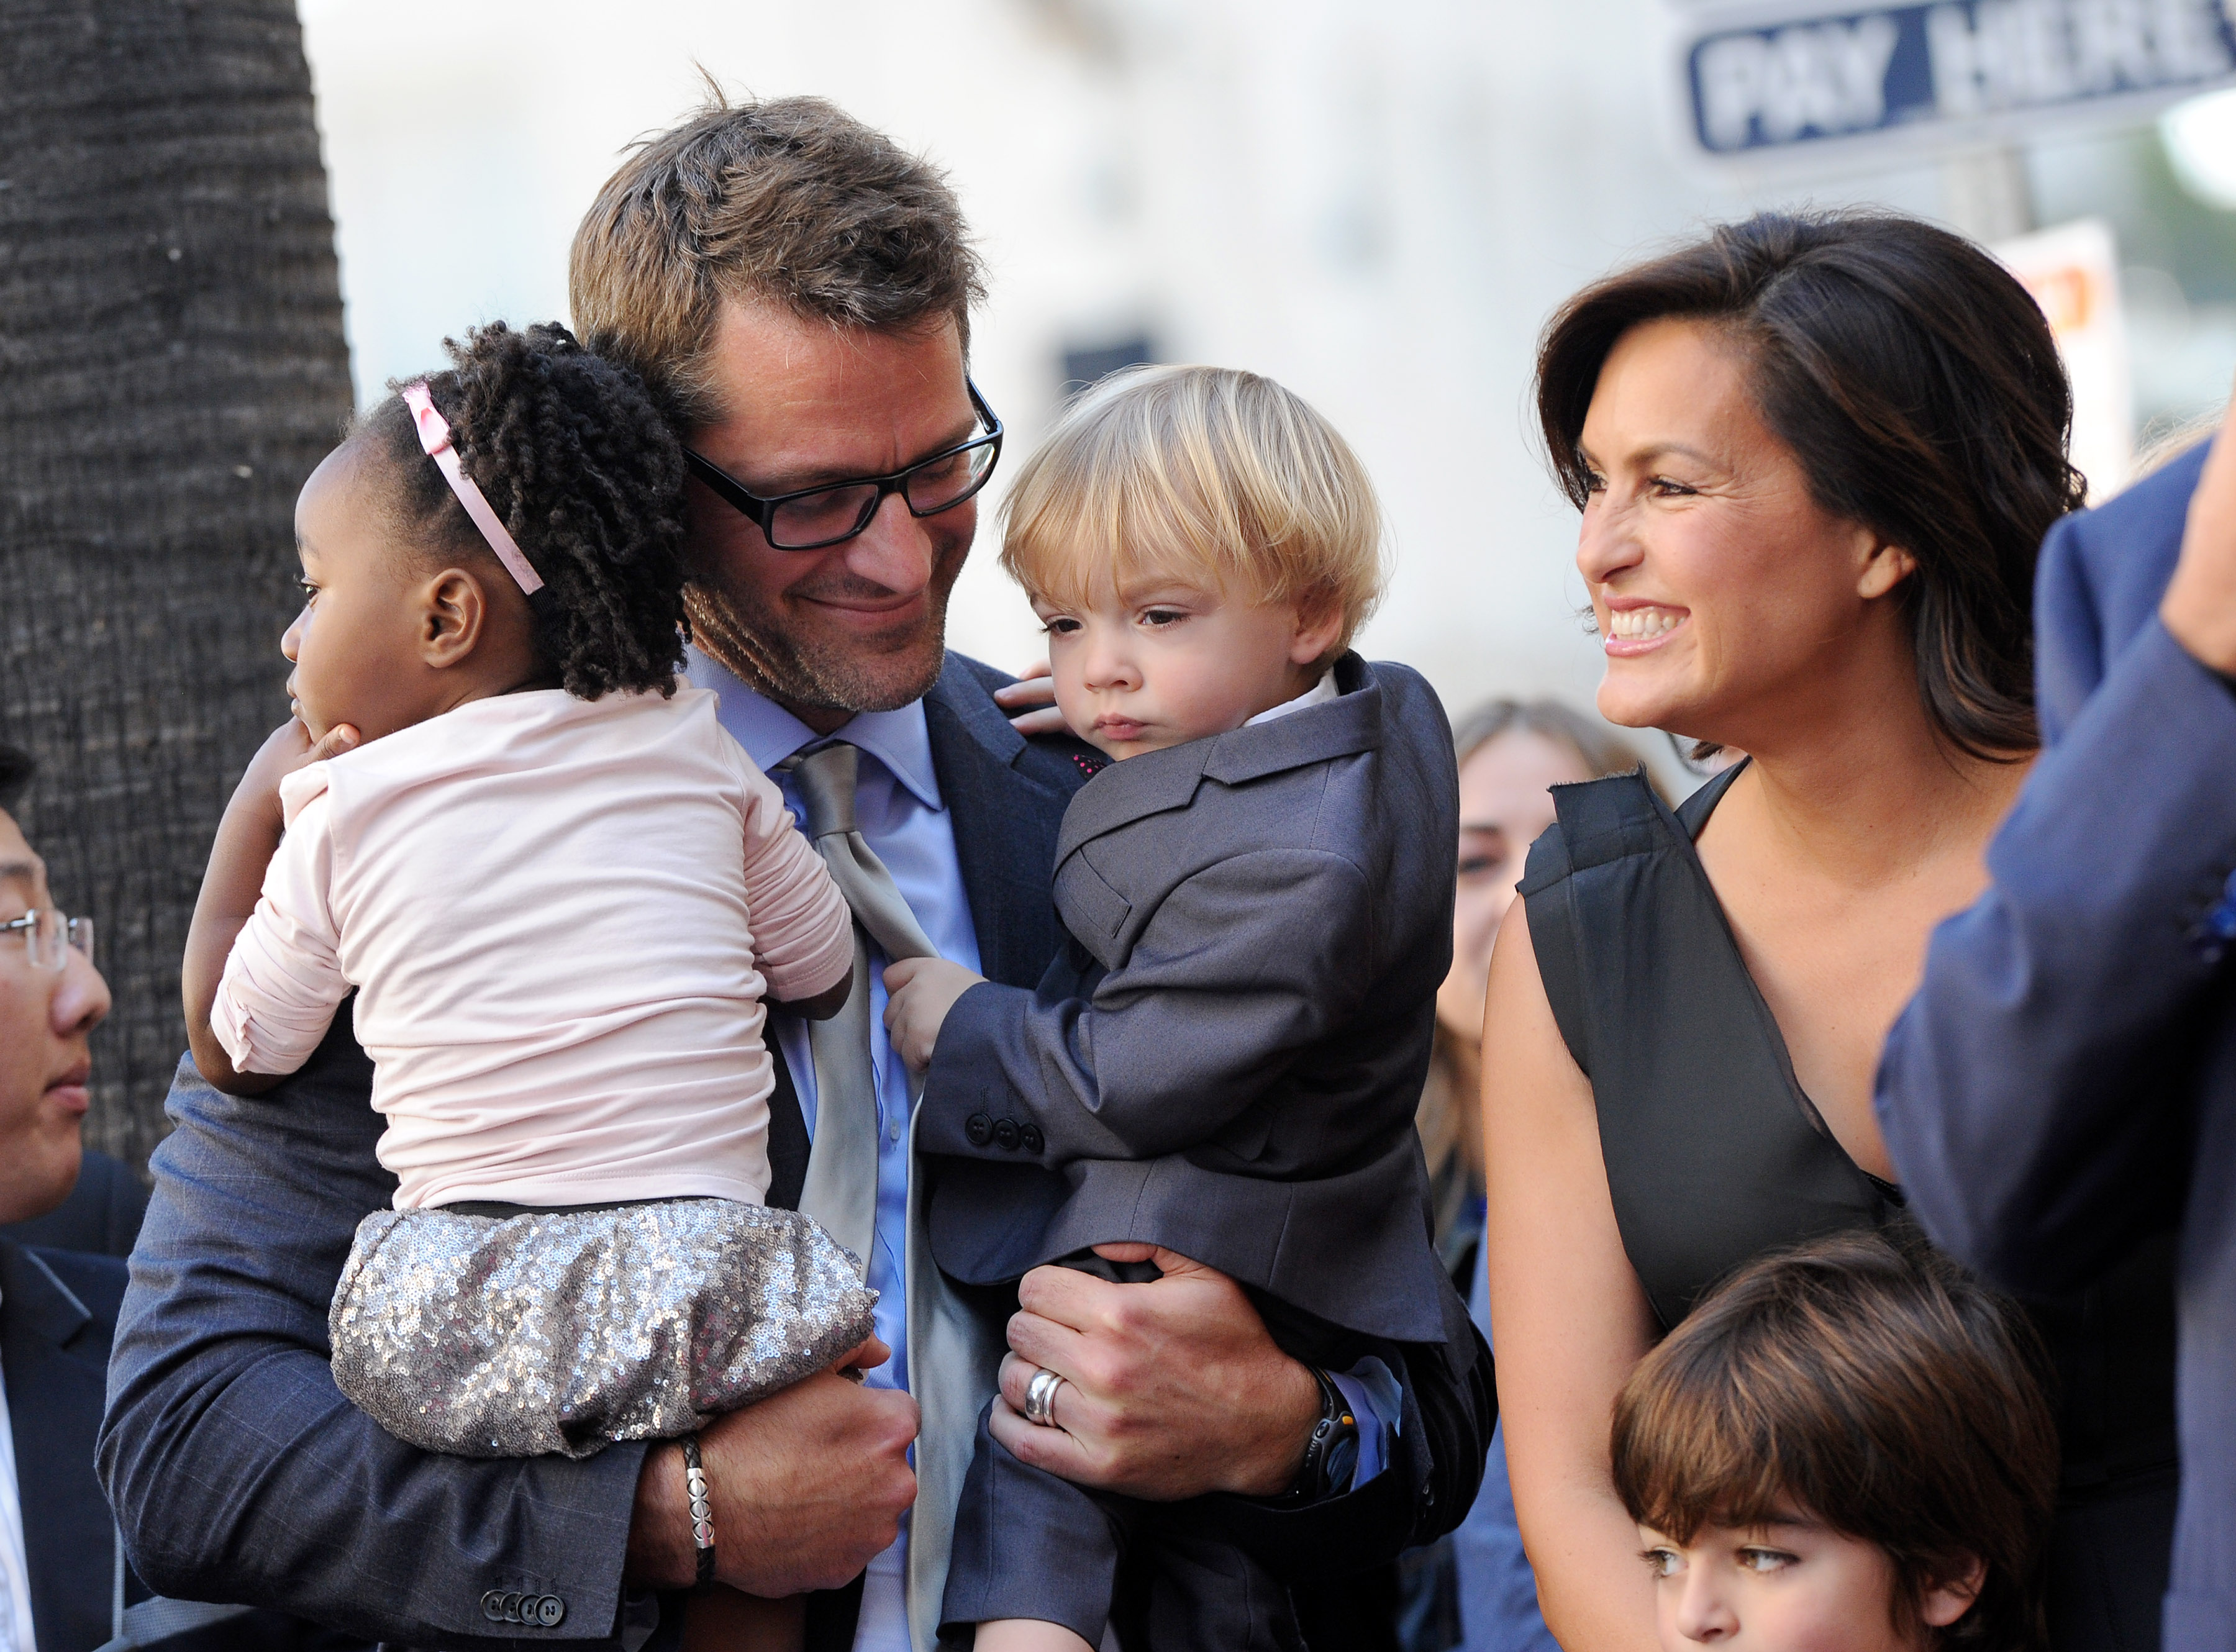 Mariska Hargitay and Peter Hermann with their children Amaya, Andrew, and August at the actress' Hollywood Walk of Fame star ceremony in Hollywood, California on November 8, 2013 | Source: Getty Images